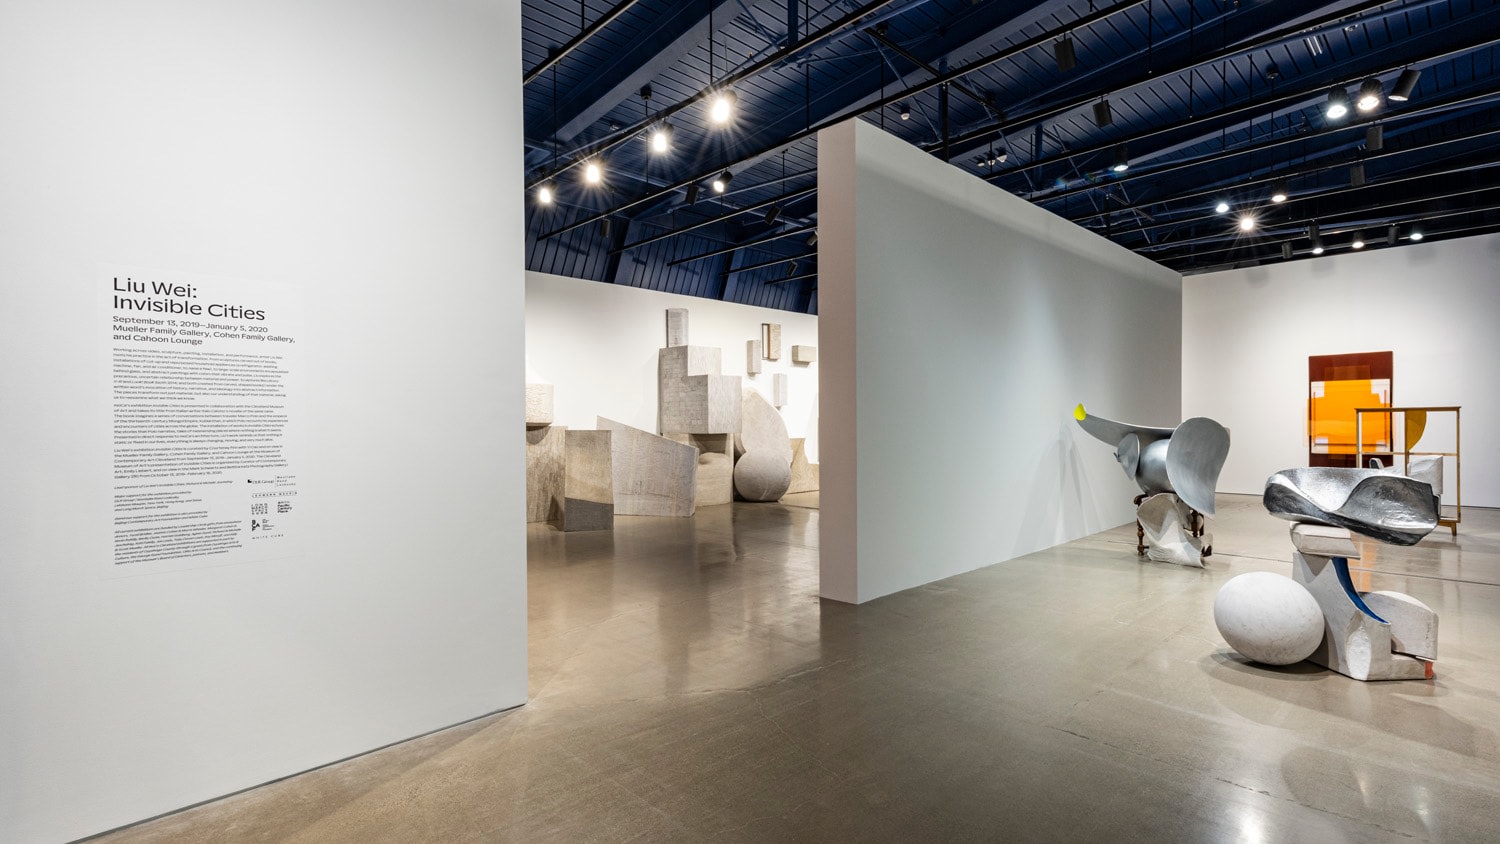 Installation view of Liu Wei Invisible Cities at moCa Cleveland, perspective 4